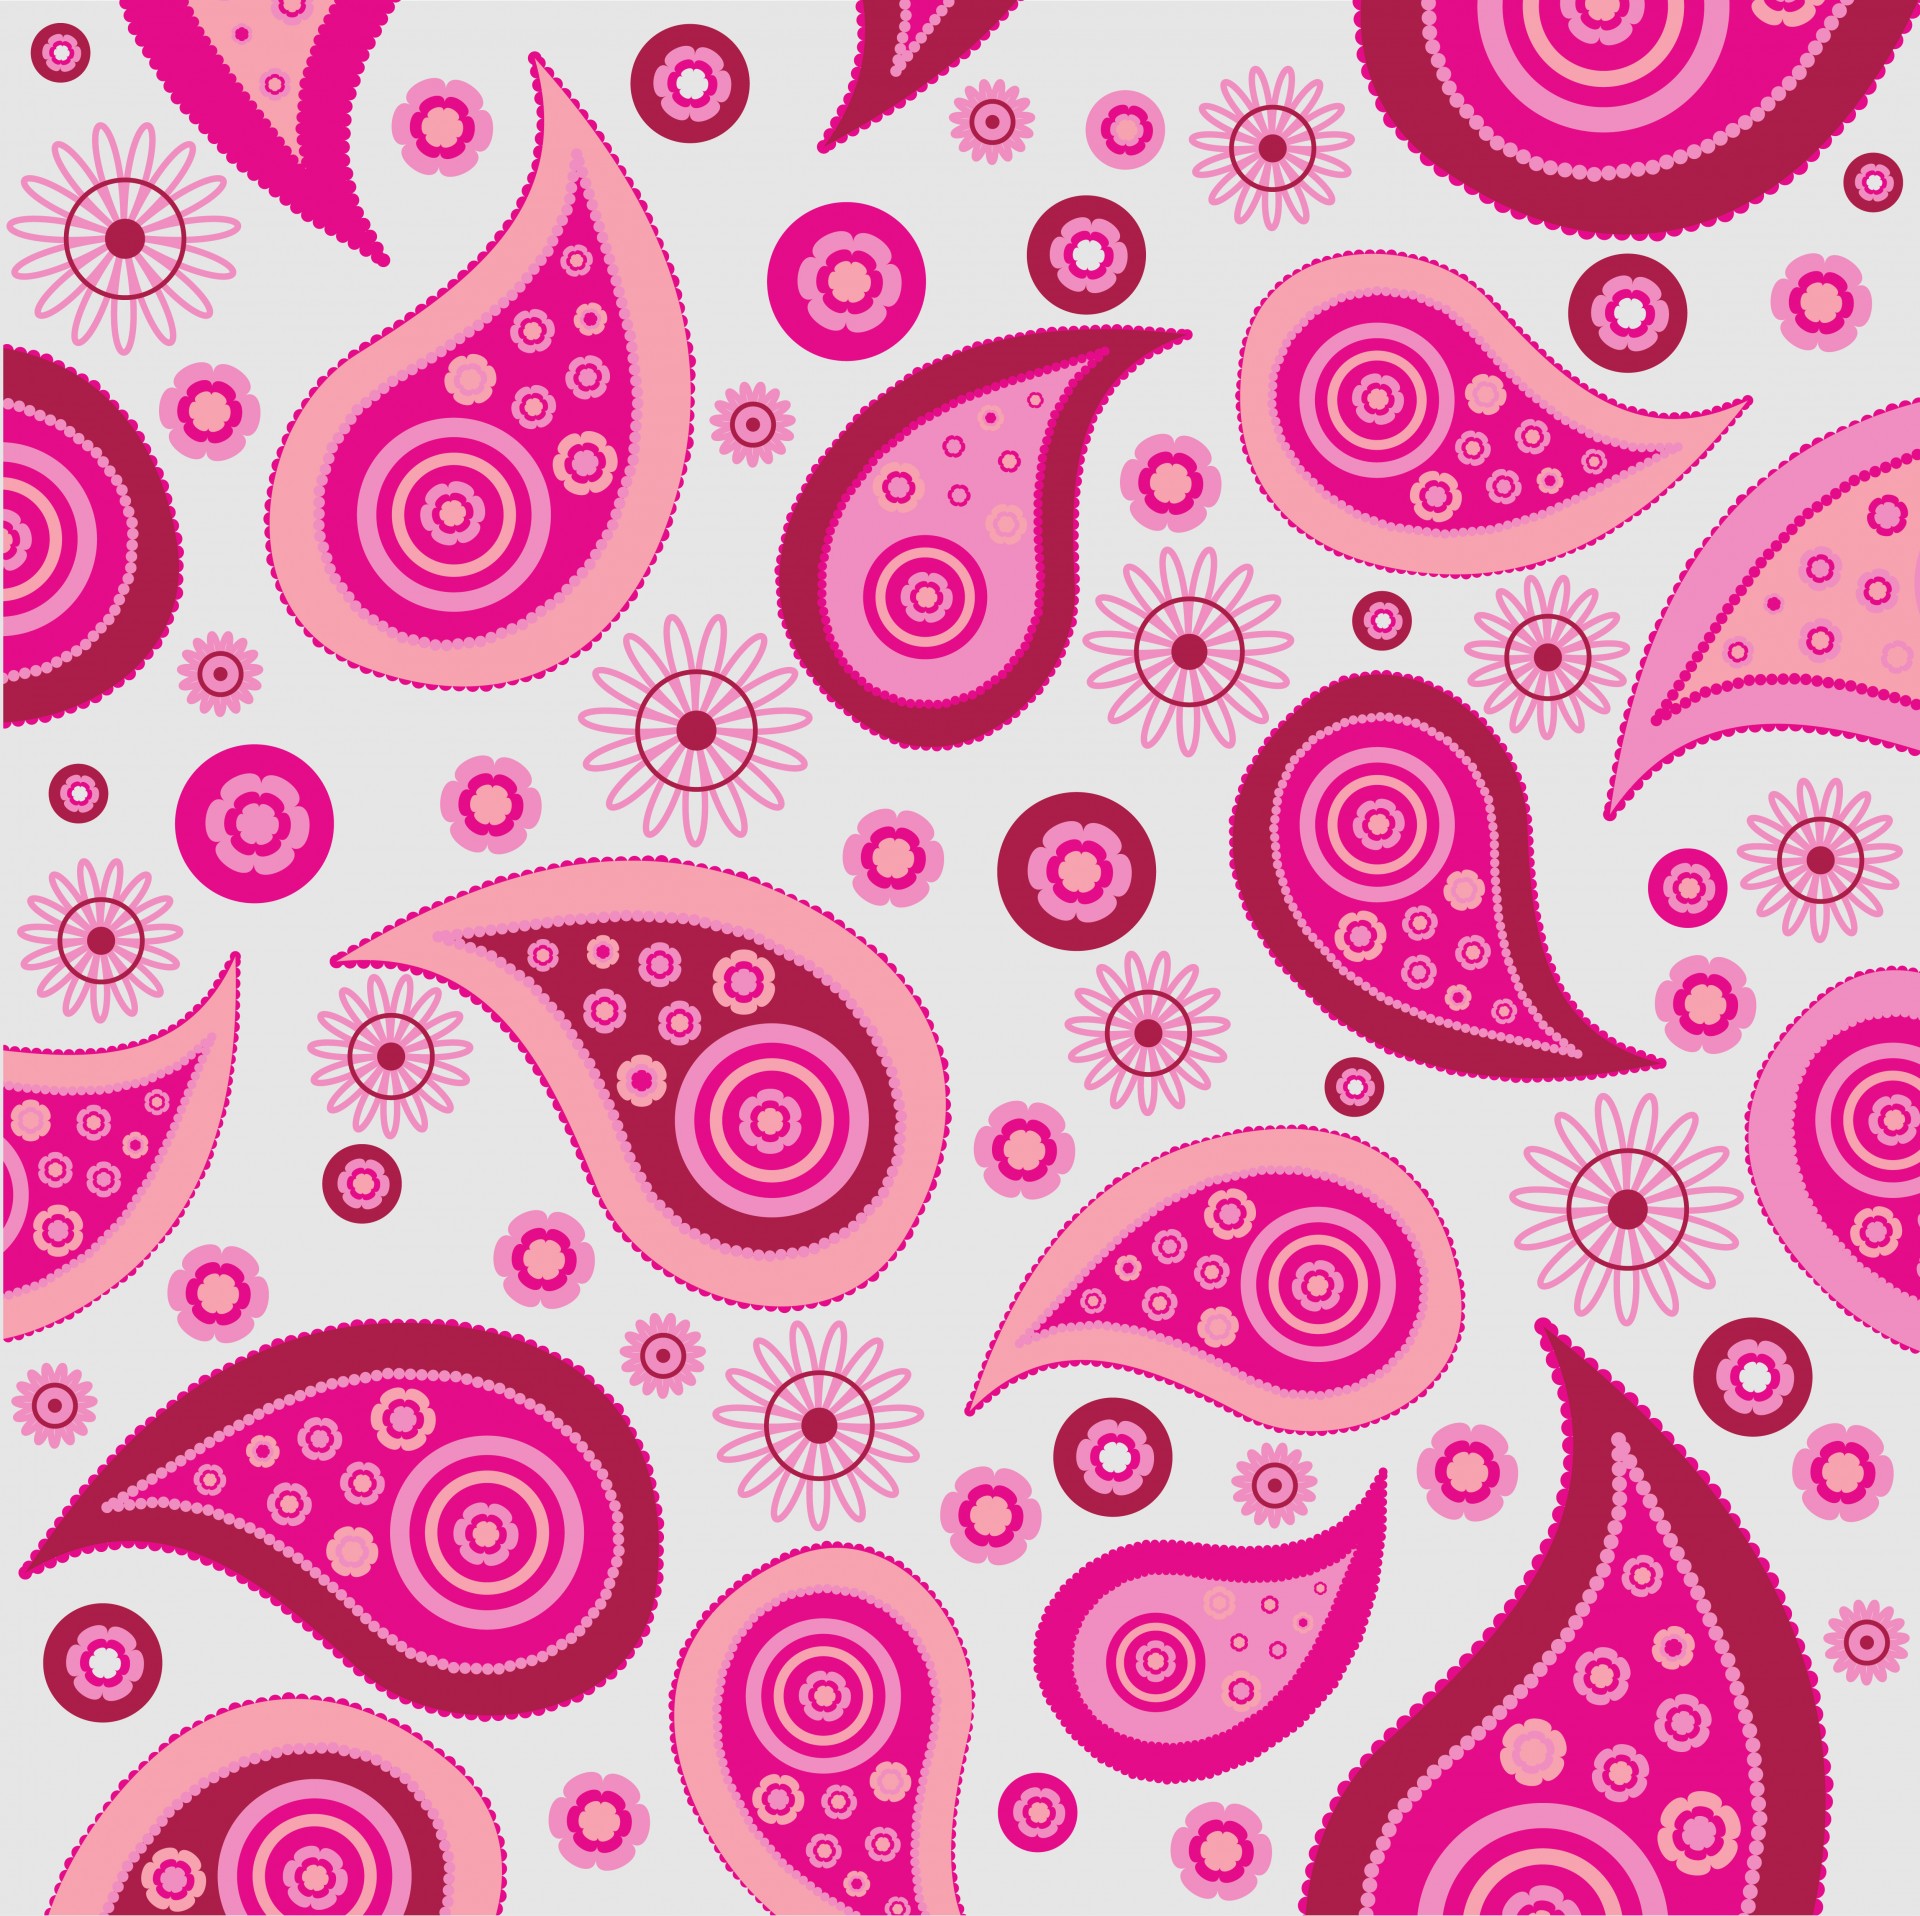 Colorful paisley pattern background wallpaper in shades of pink